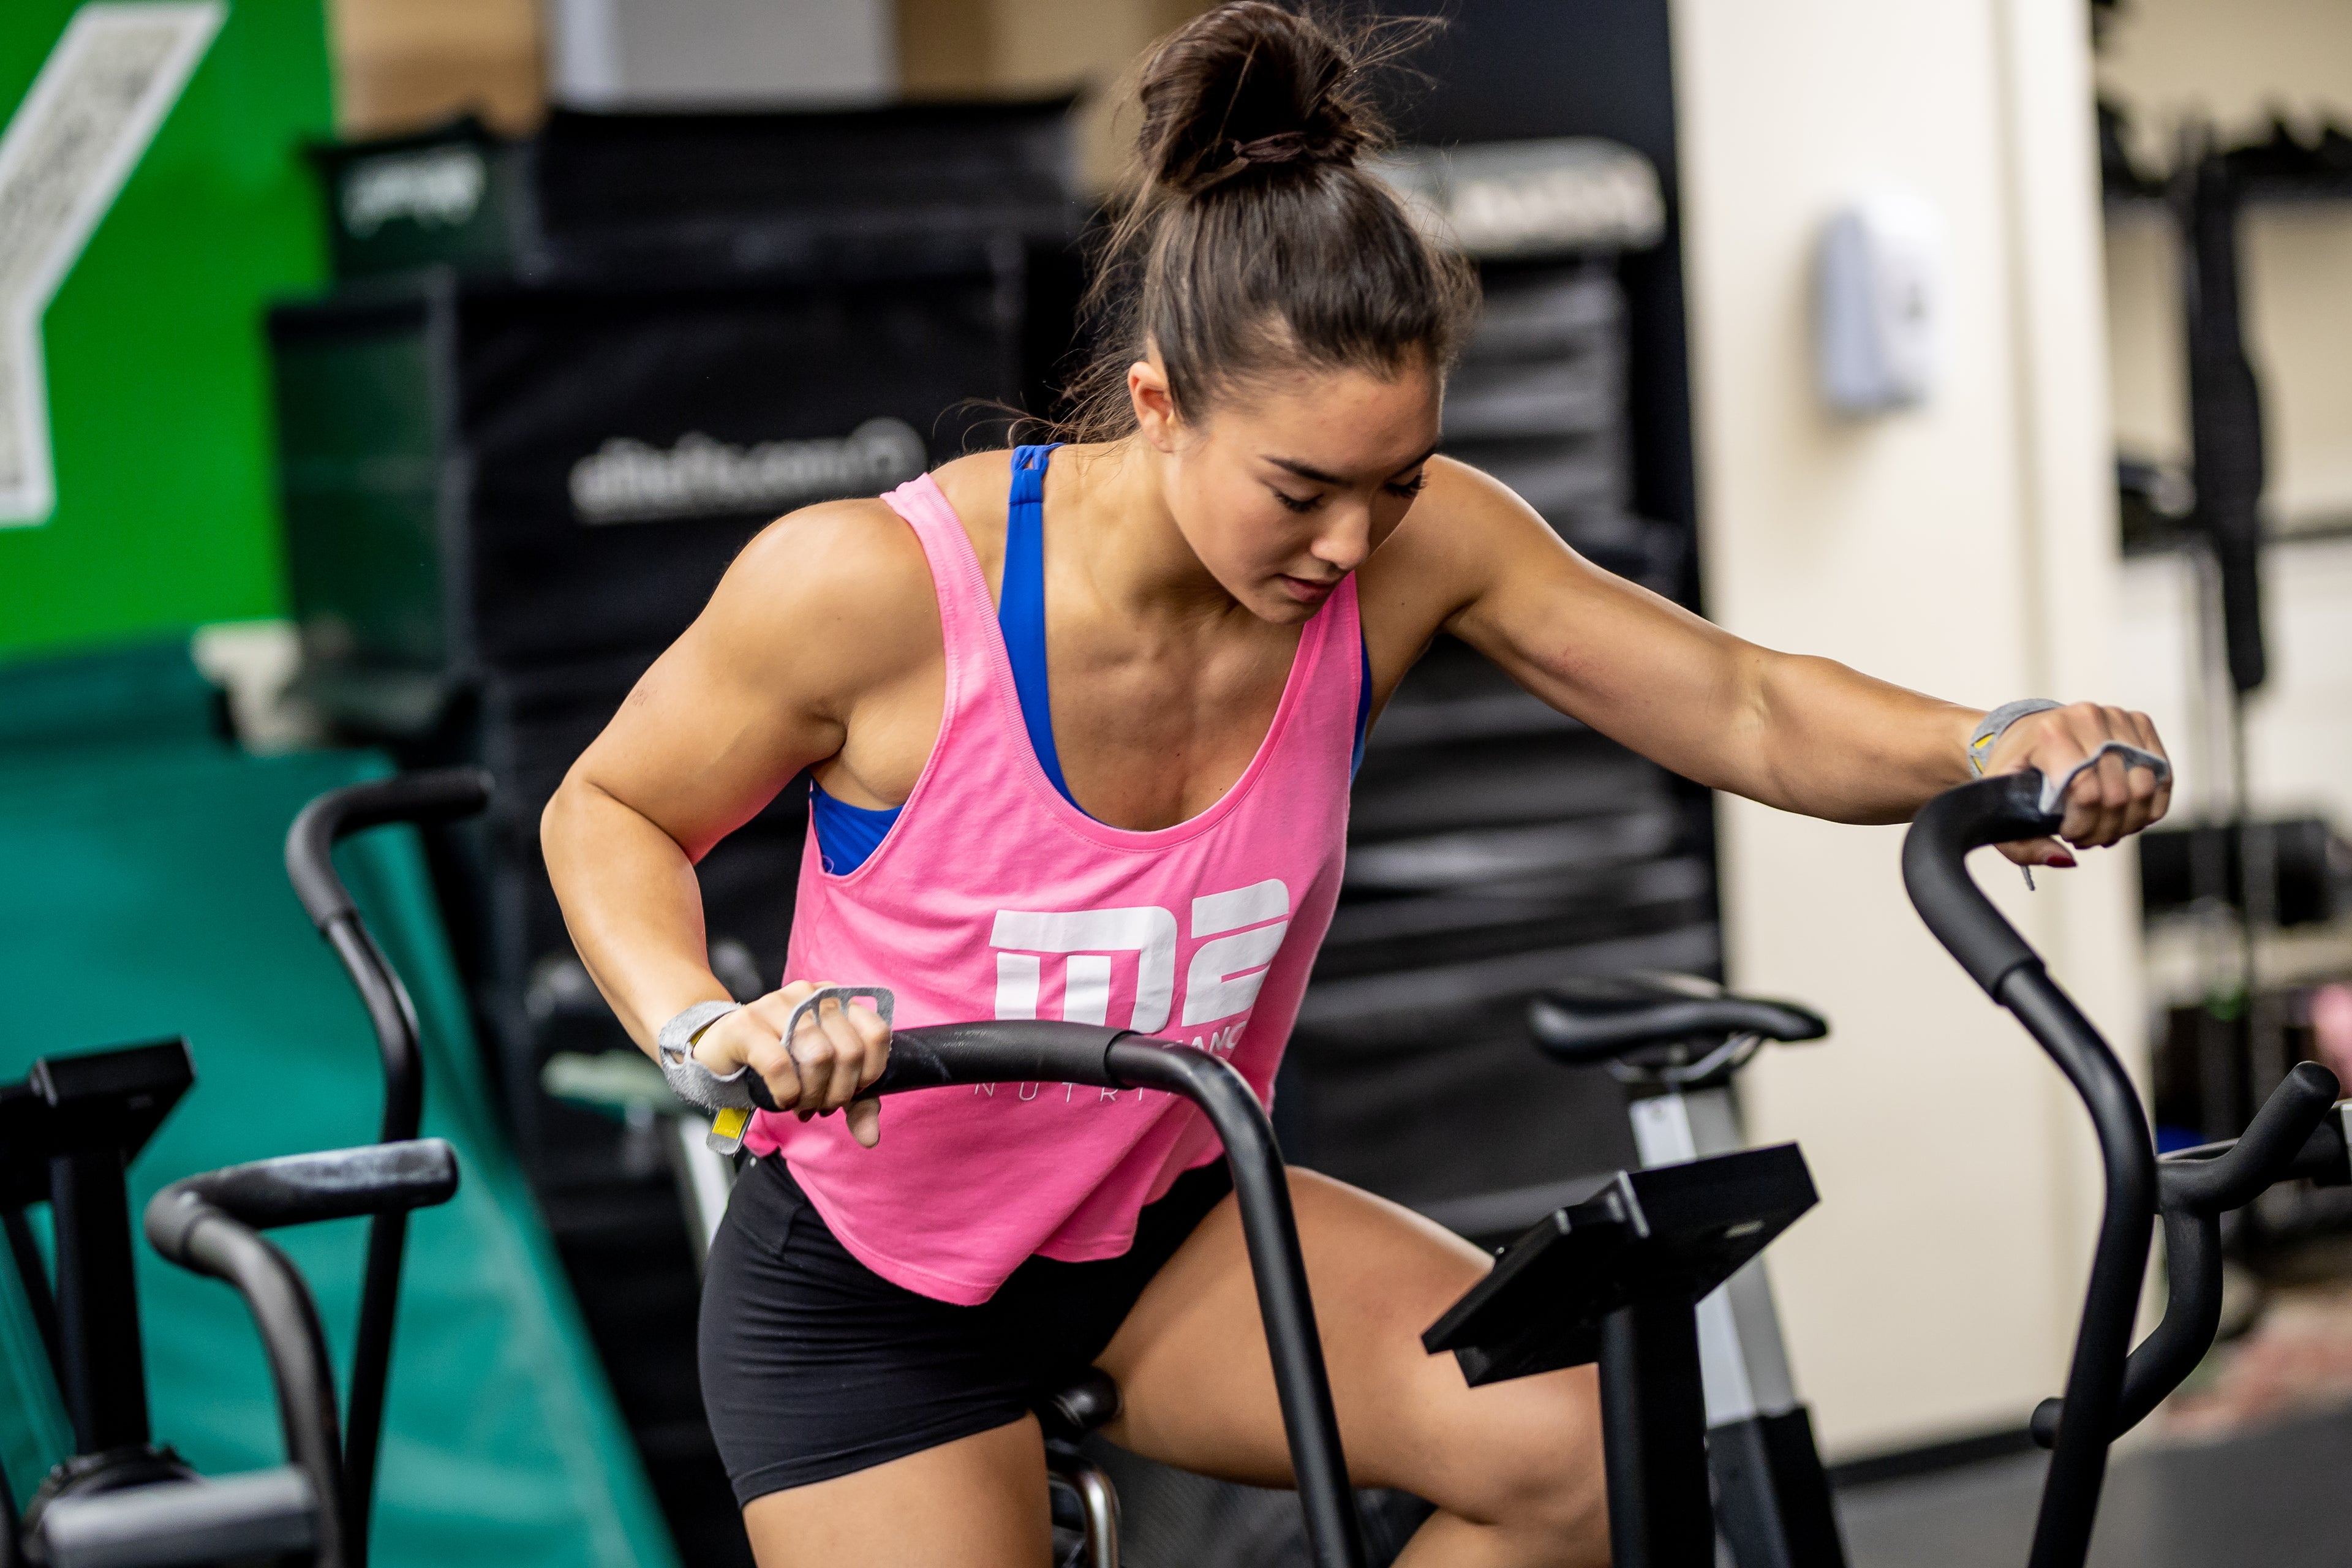 Person in a pink shirt working out on the Assaultbike around other fitness equipment